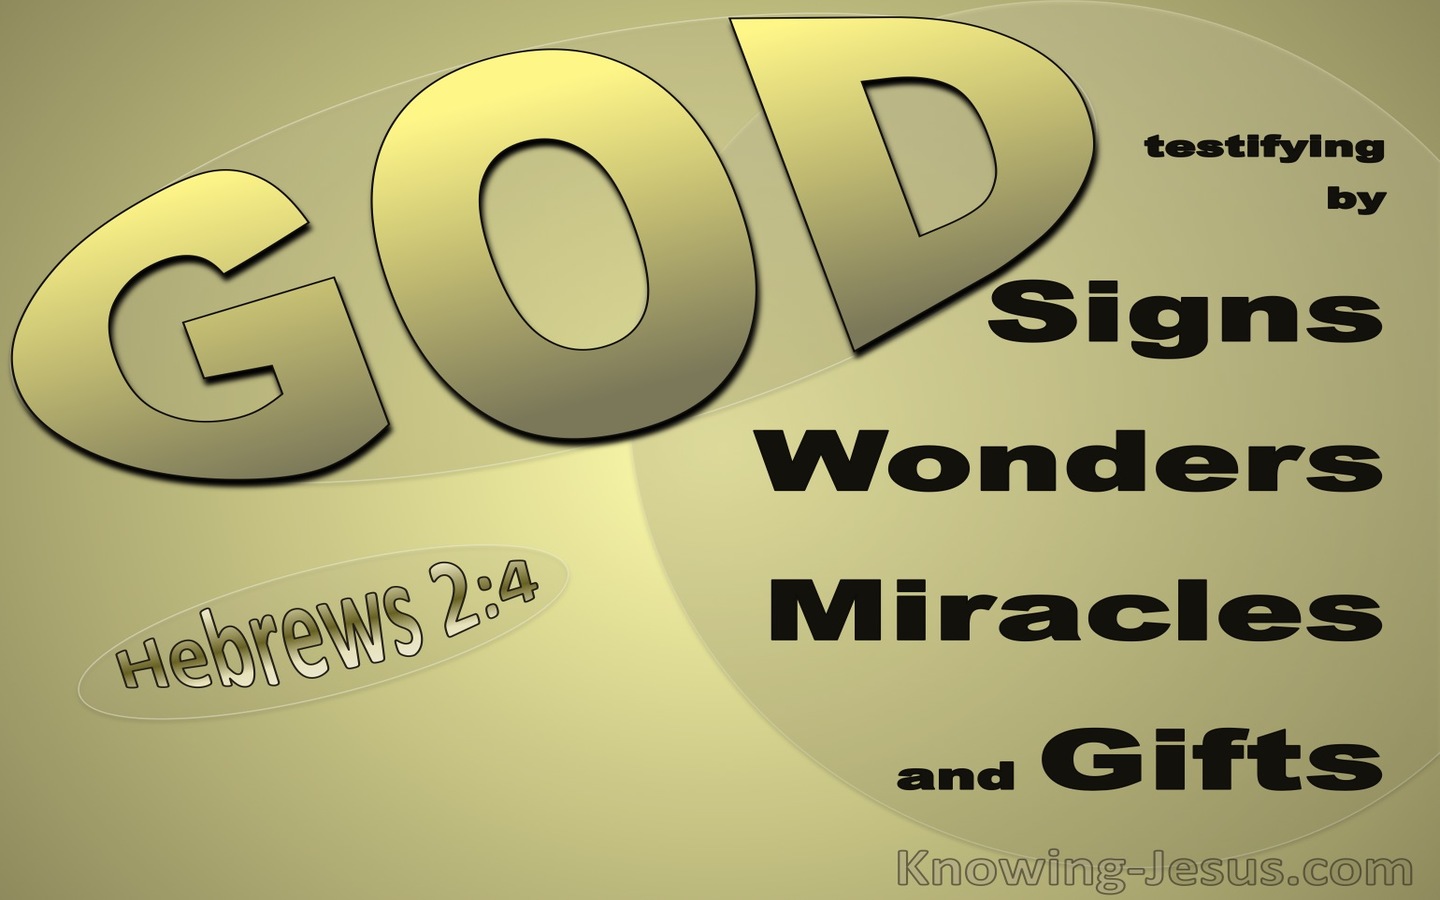 Hebrews 2:4 God Testifying By Signs, Wonders, Miracles And Gifts (gold)